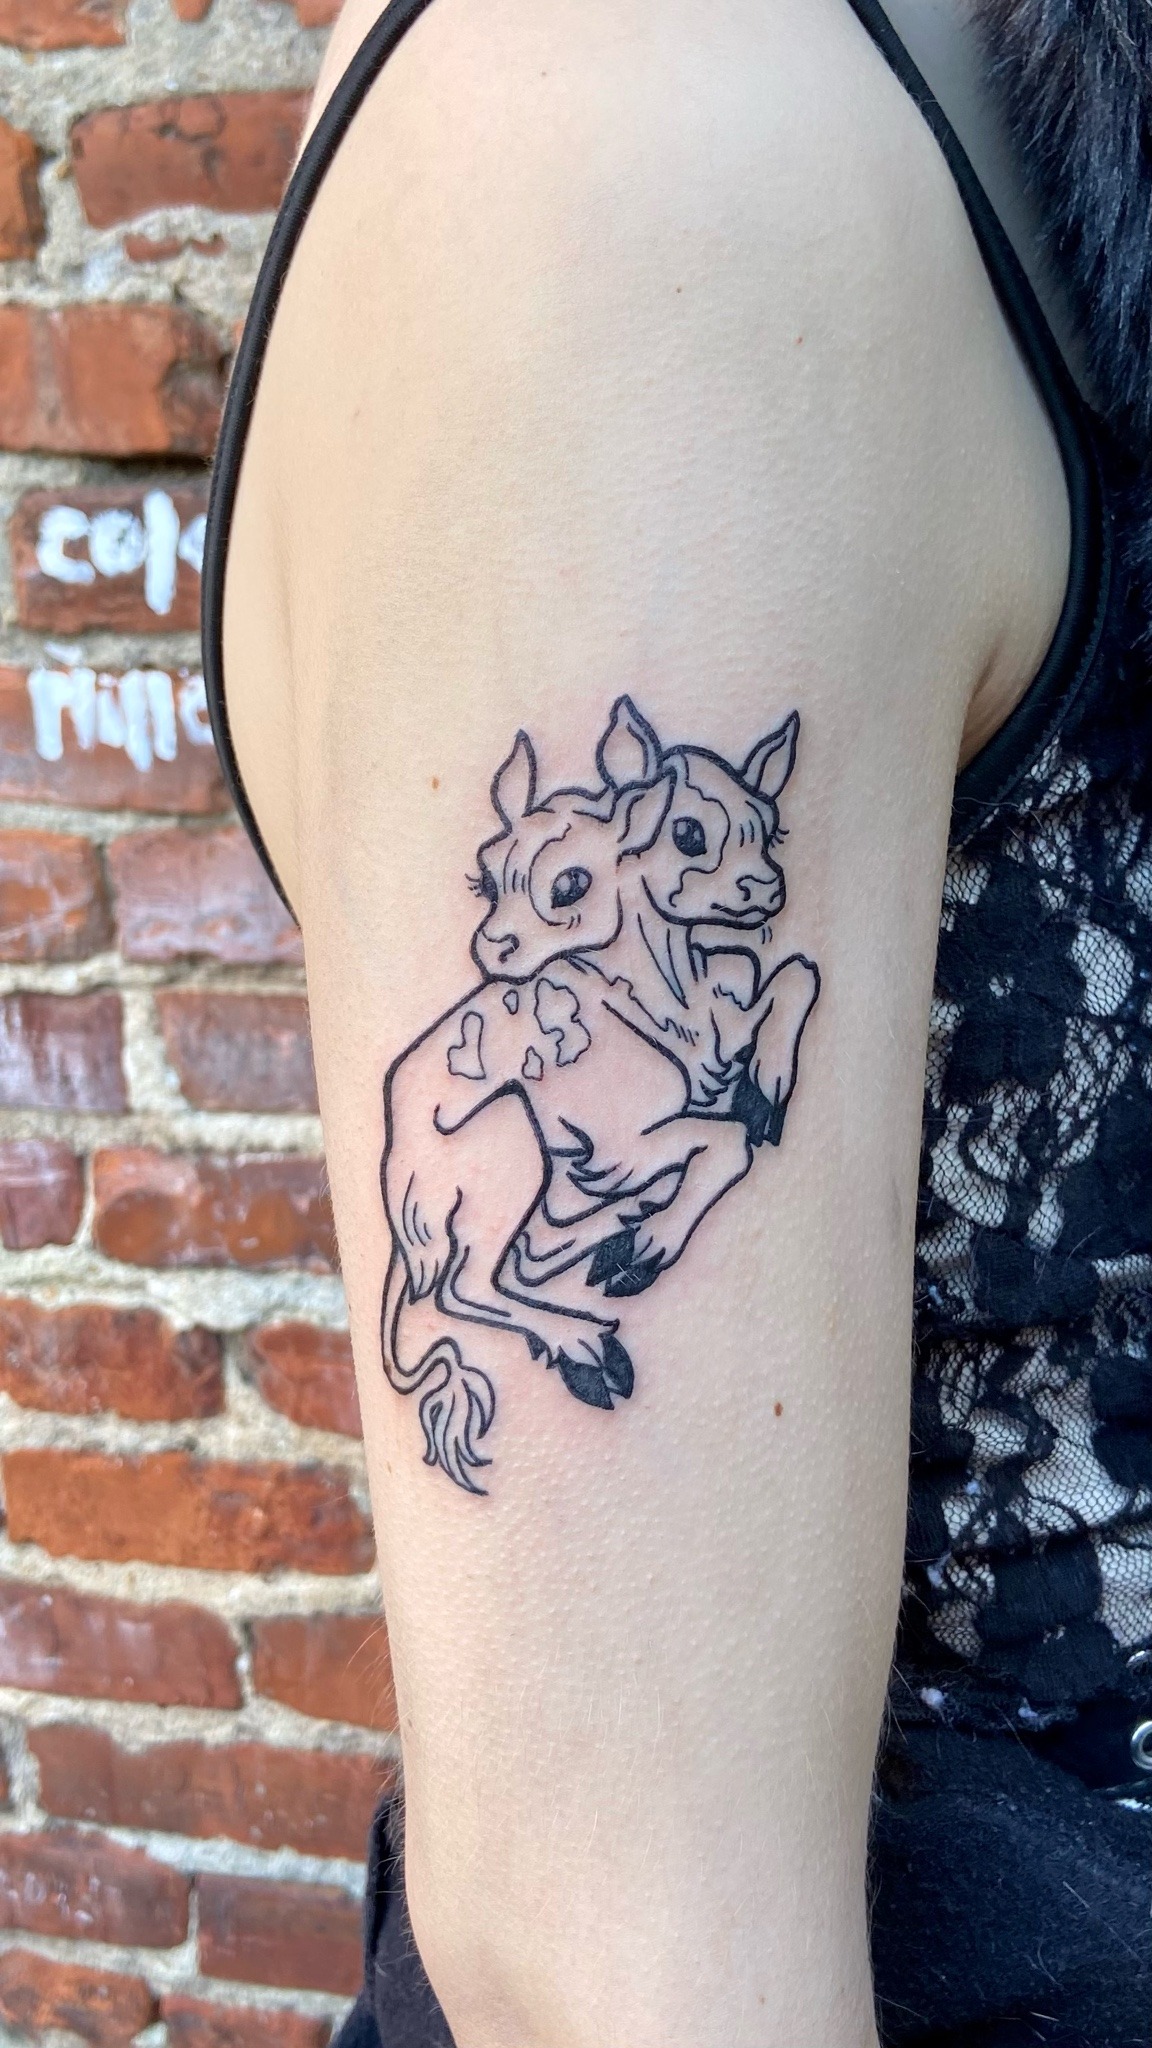 A L E K I V Z — matching twin cow tattoos for twins 👍